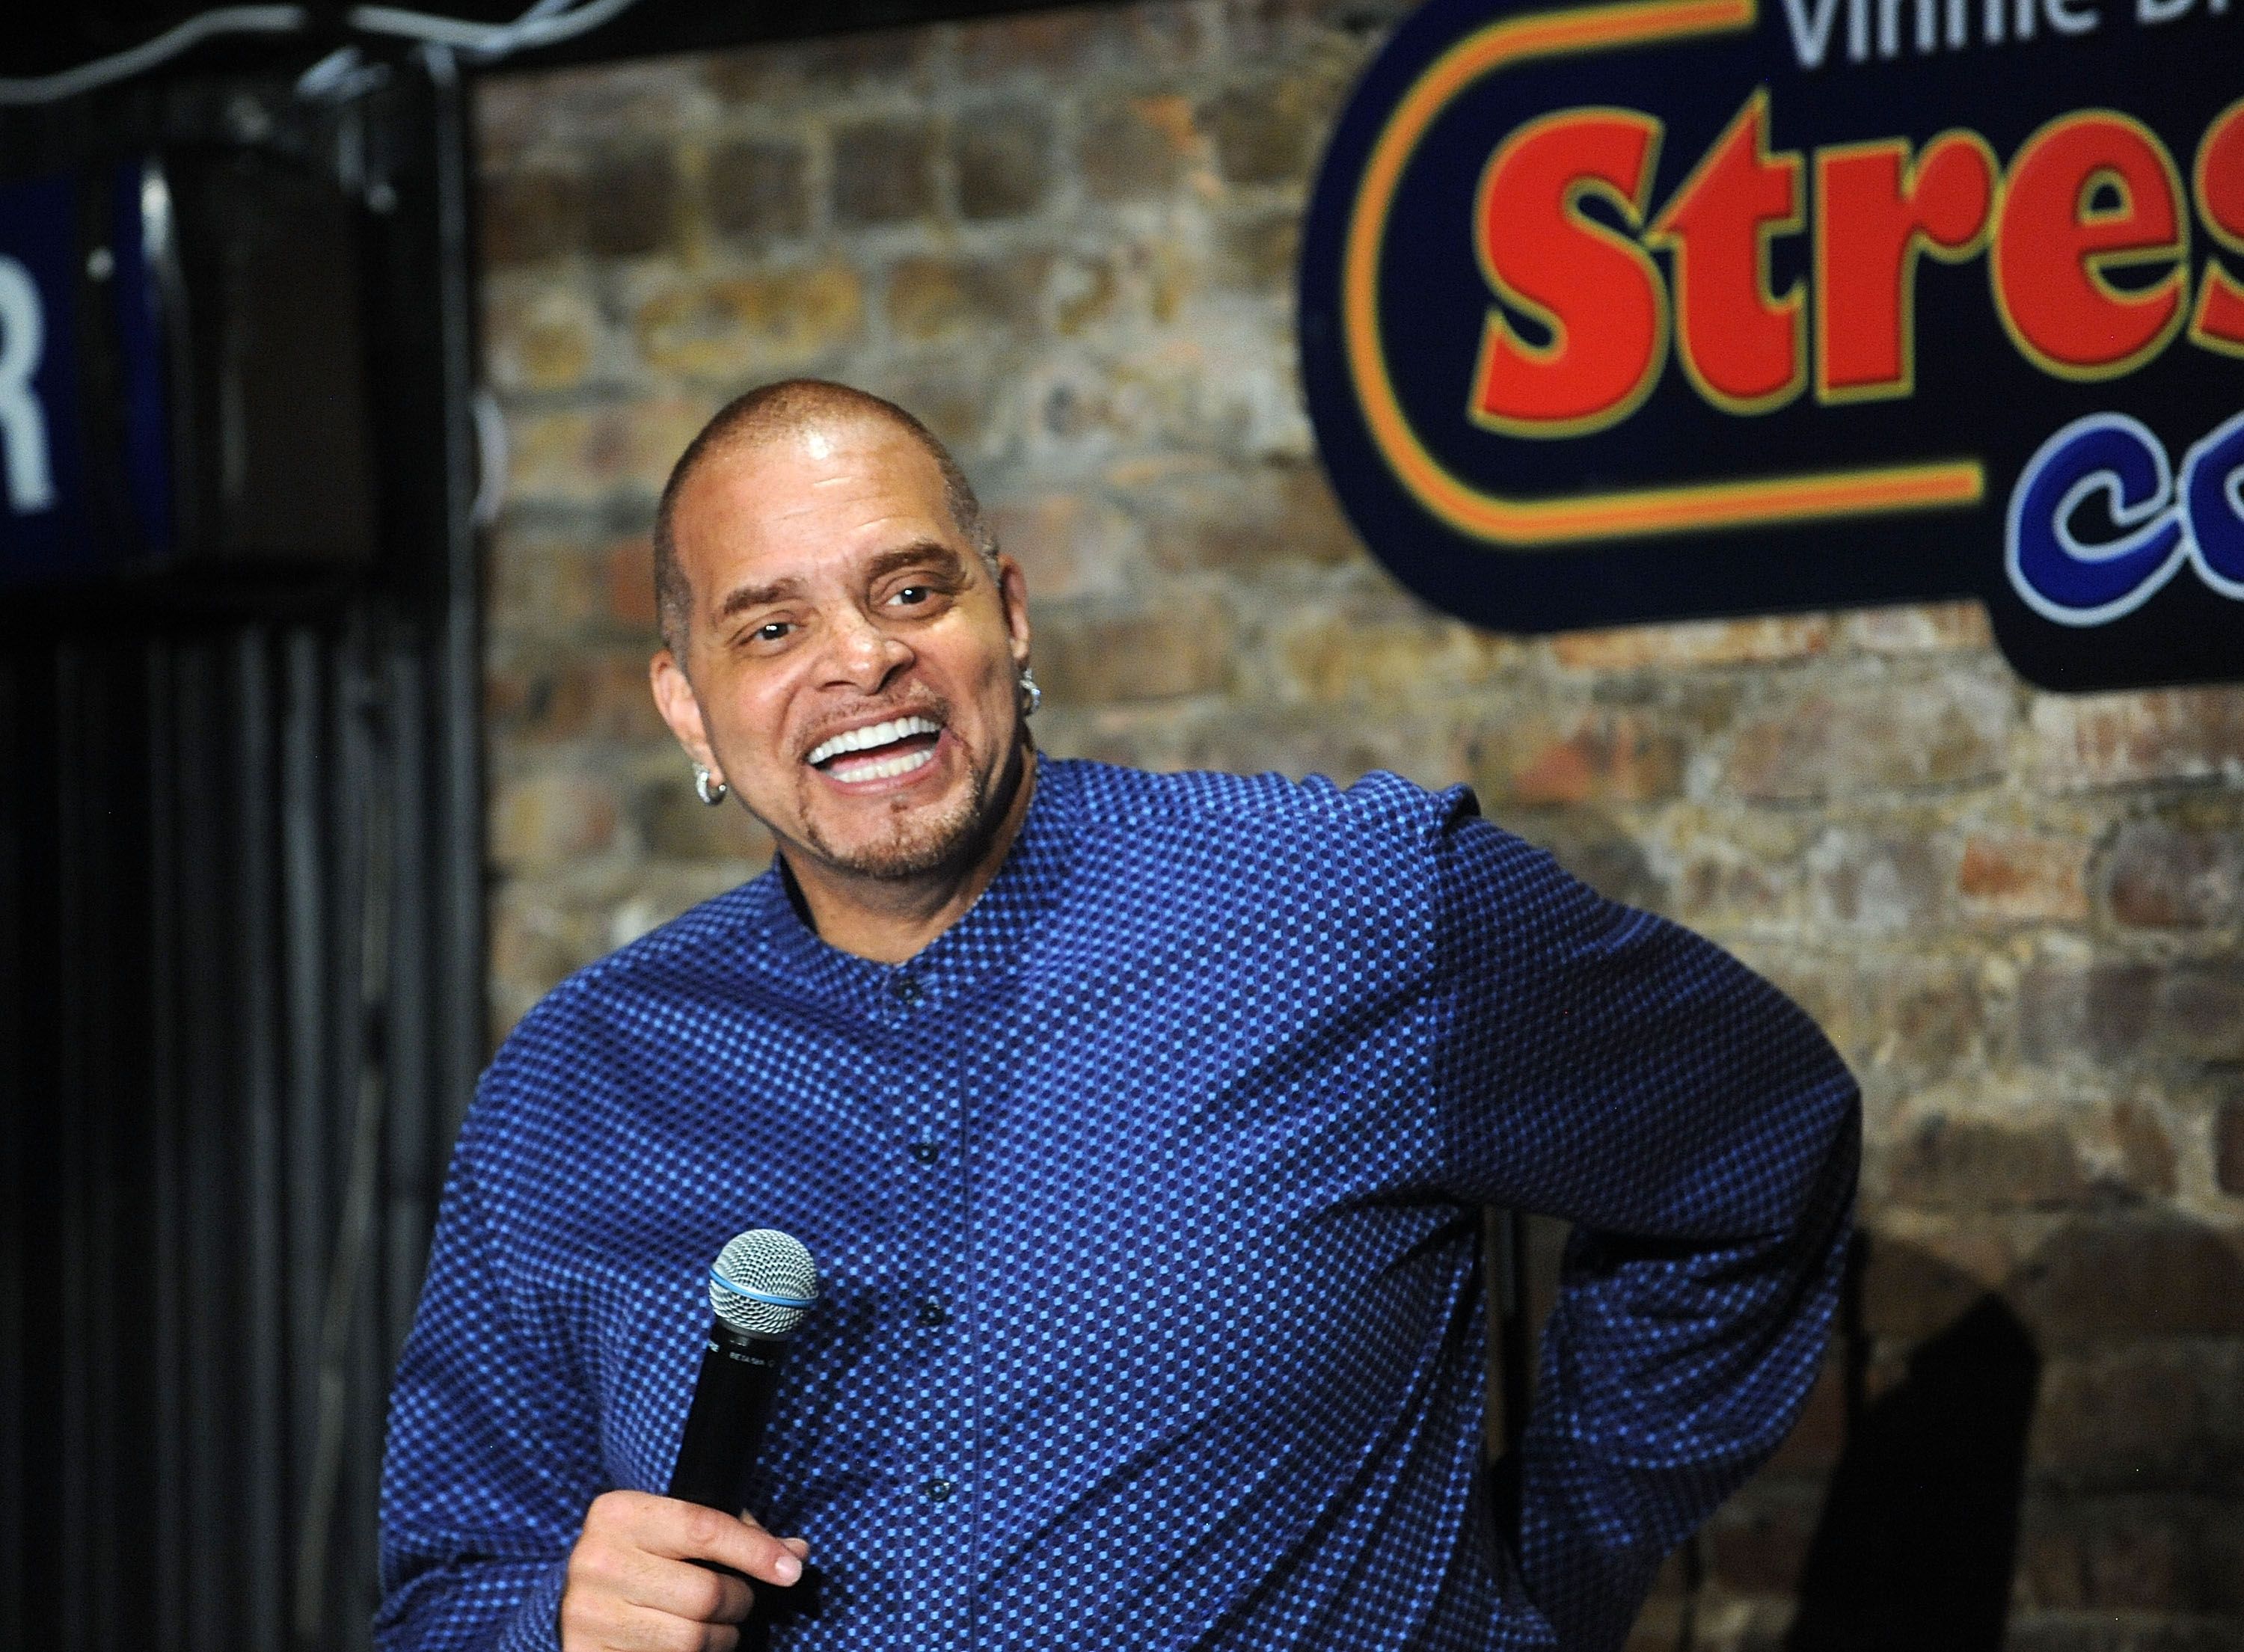 Sinbad performs at the Stress Factory Comedy Club on June 30, 2017 | Photo: Getty Images